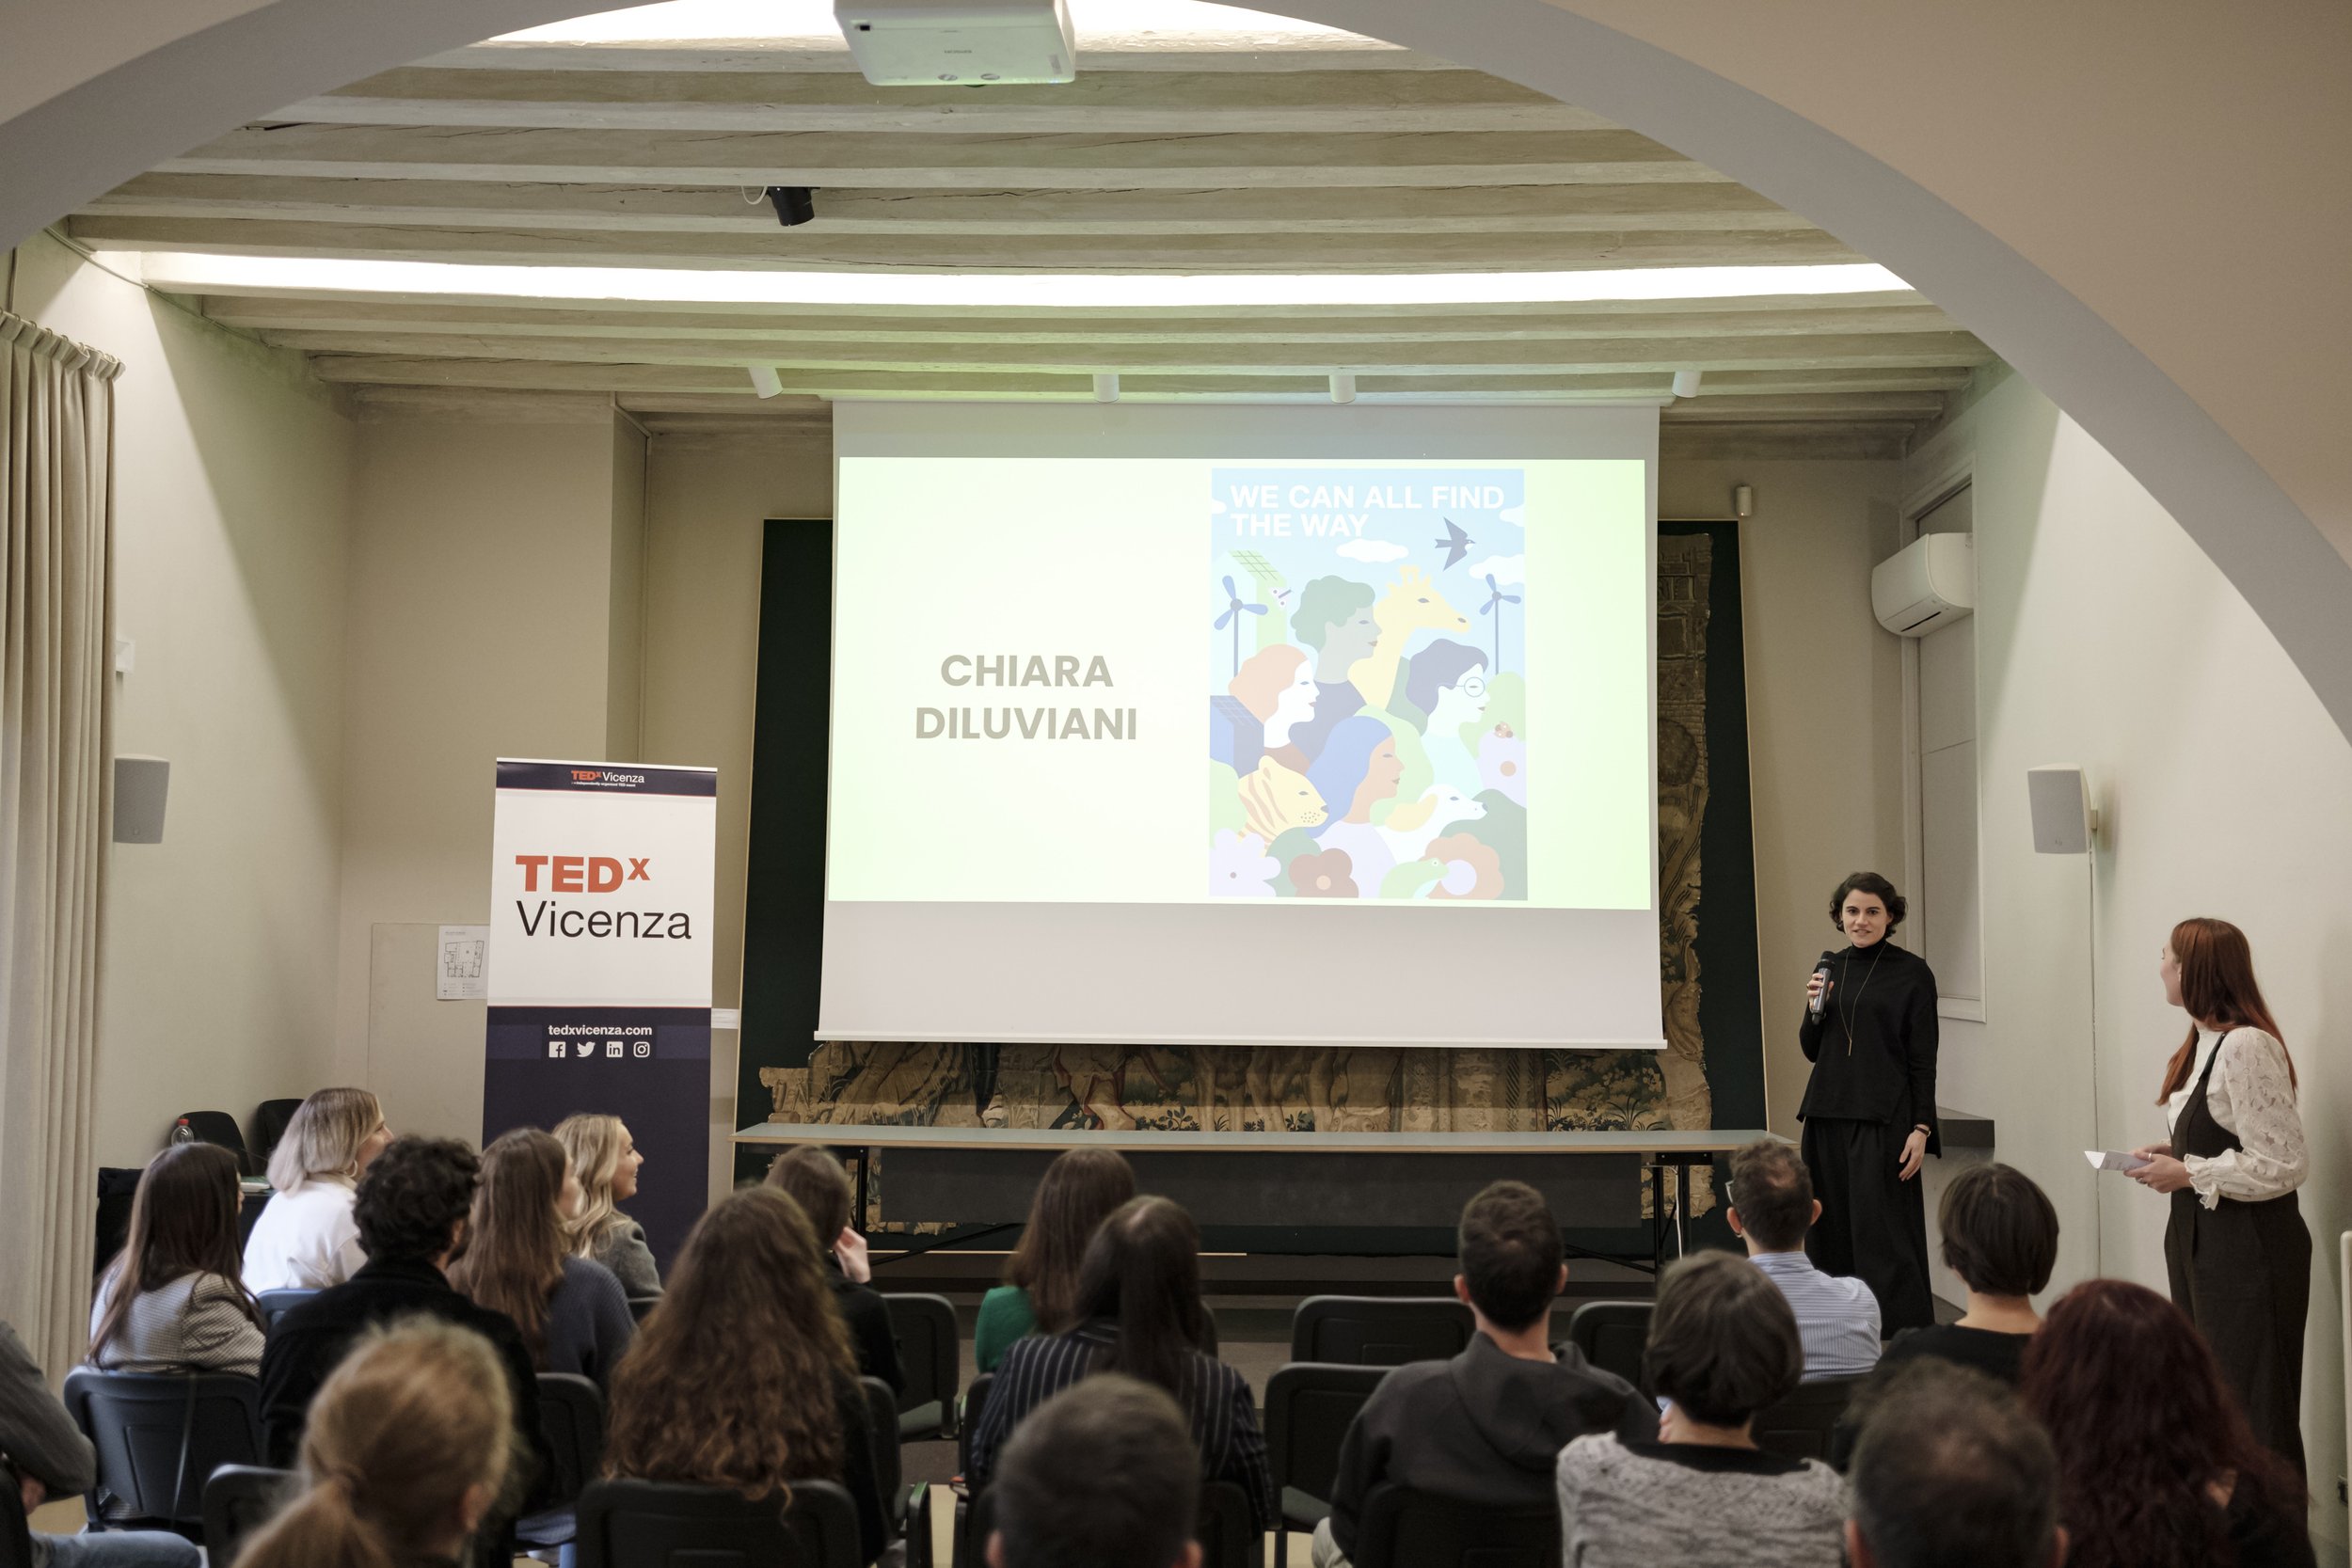 tedxvicenza--sprints-for-tedx-countdown_53332140668_o.jpg